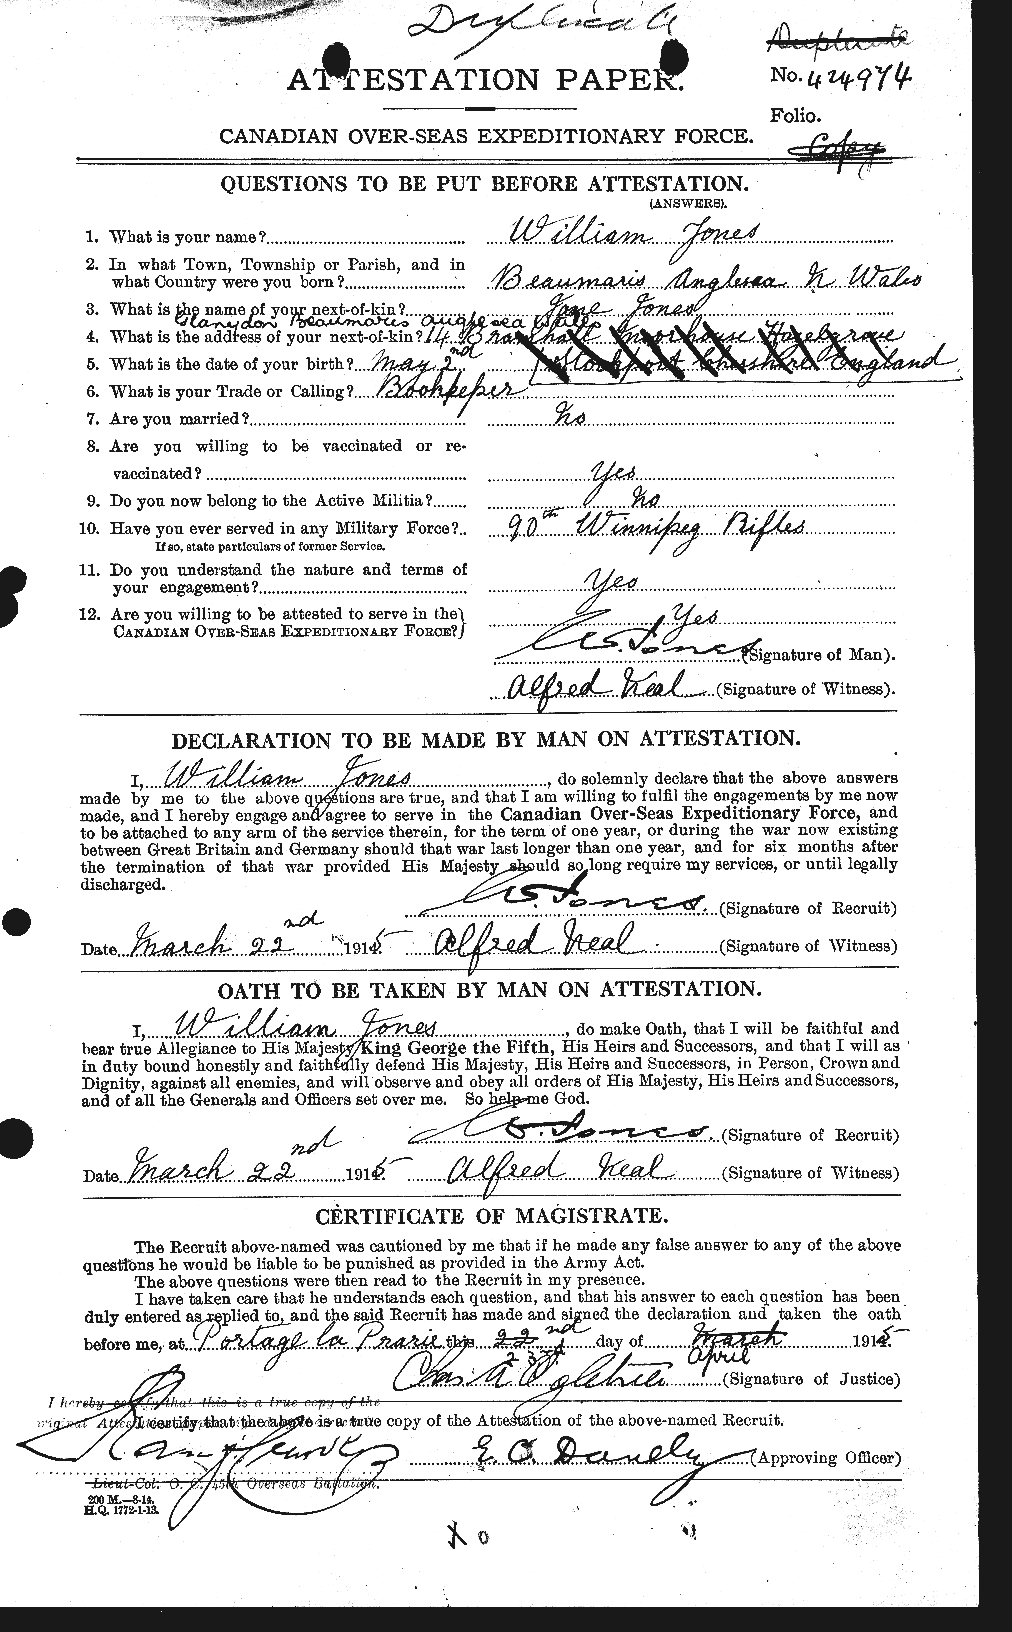 Personnel Records of the First World War - CEF 426853a